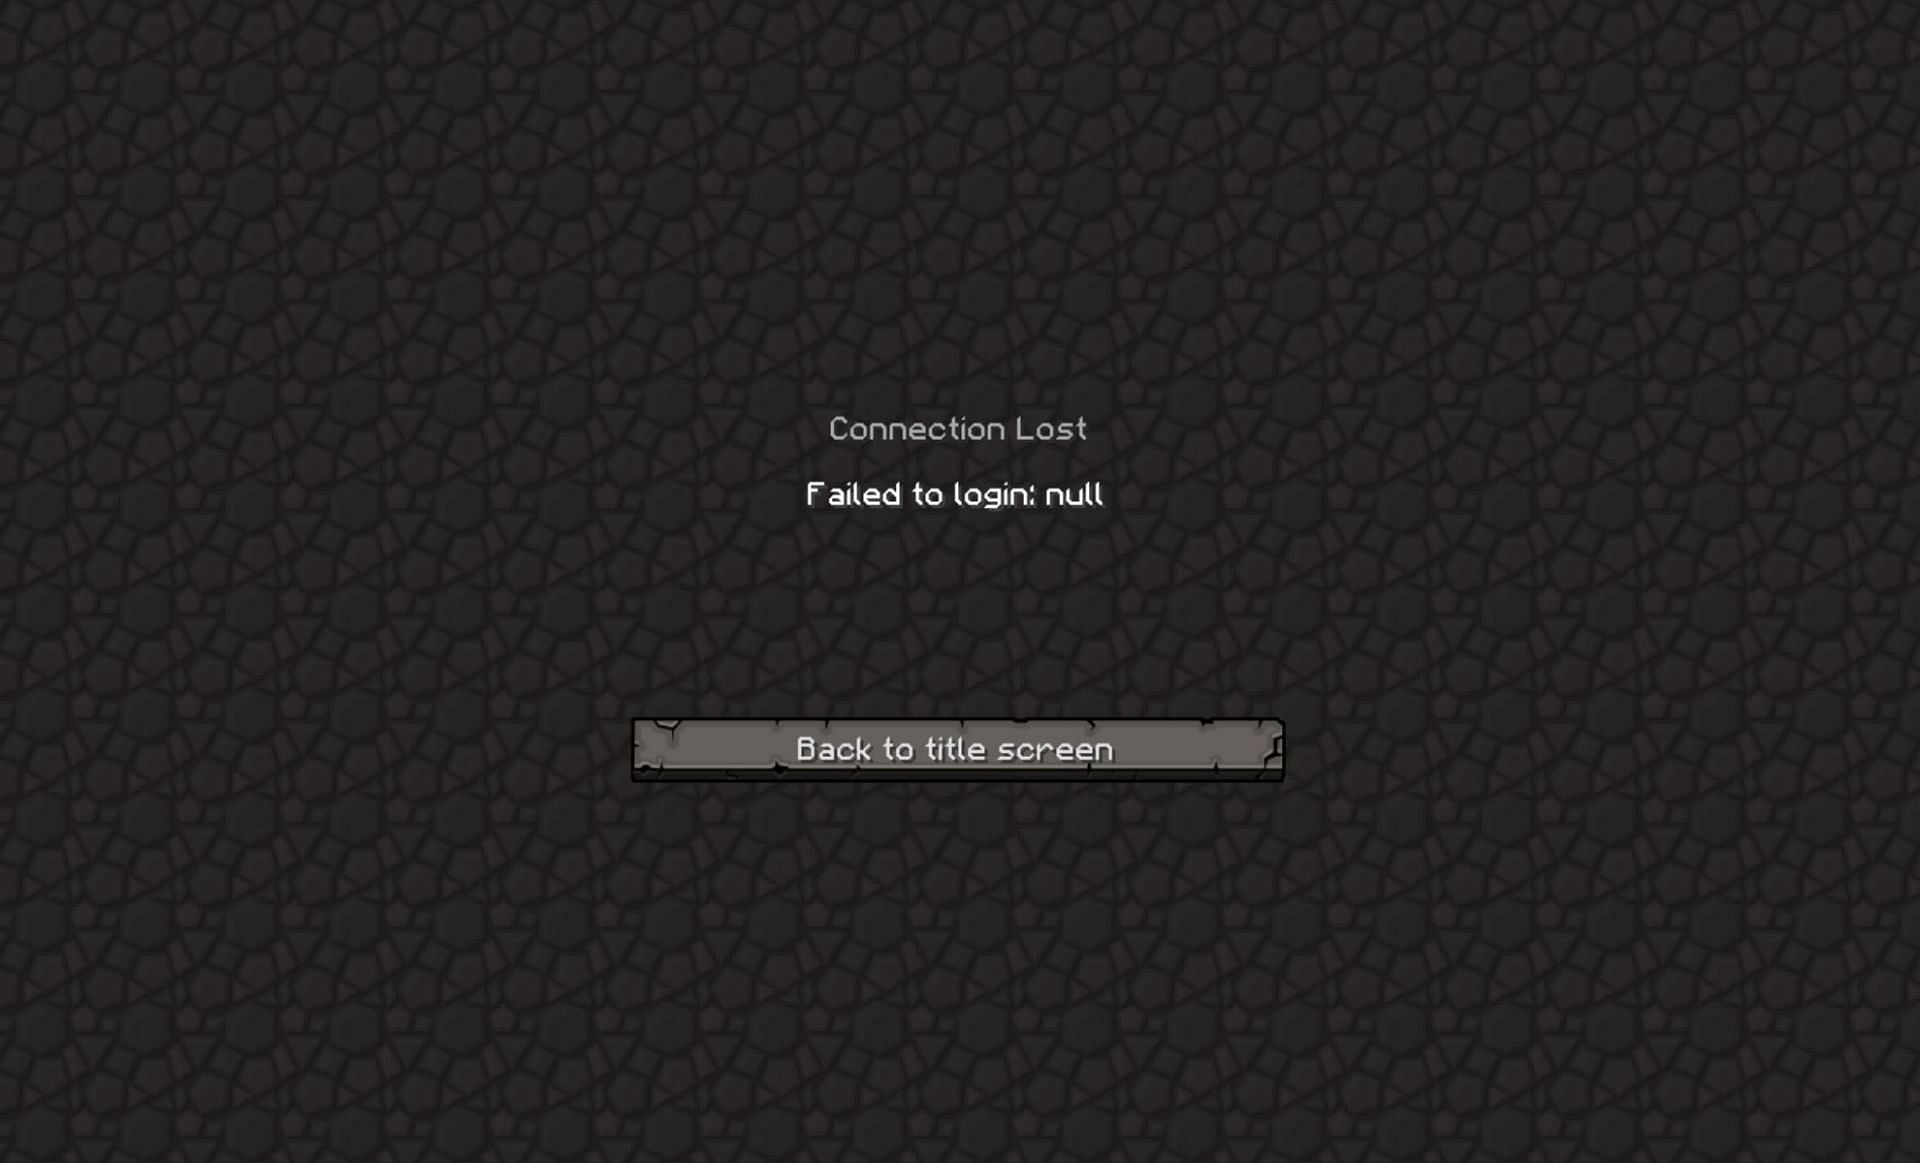 Failed to login:null, a standard server issue (Image via Minecraft Forum)